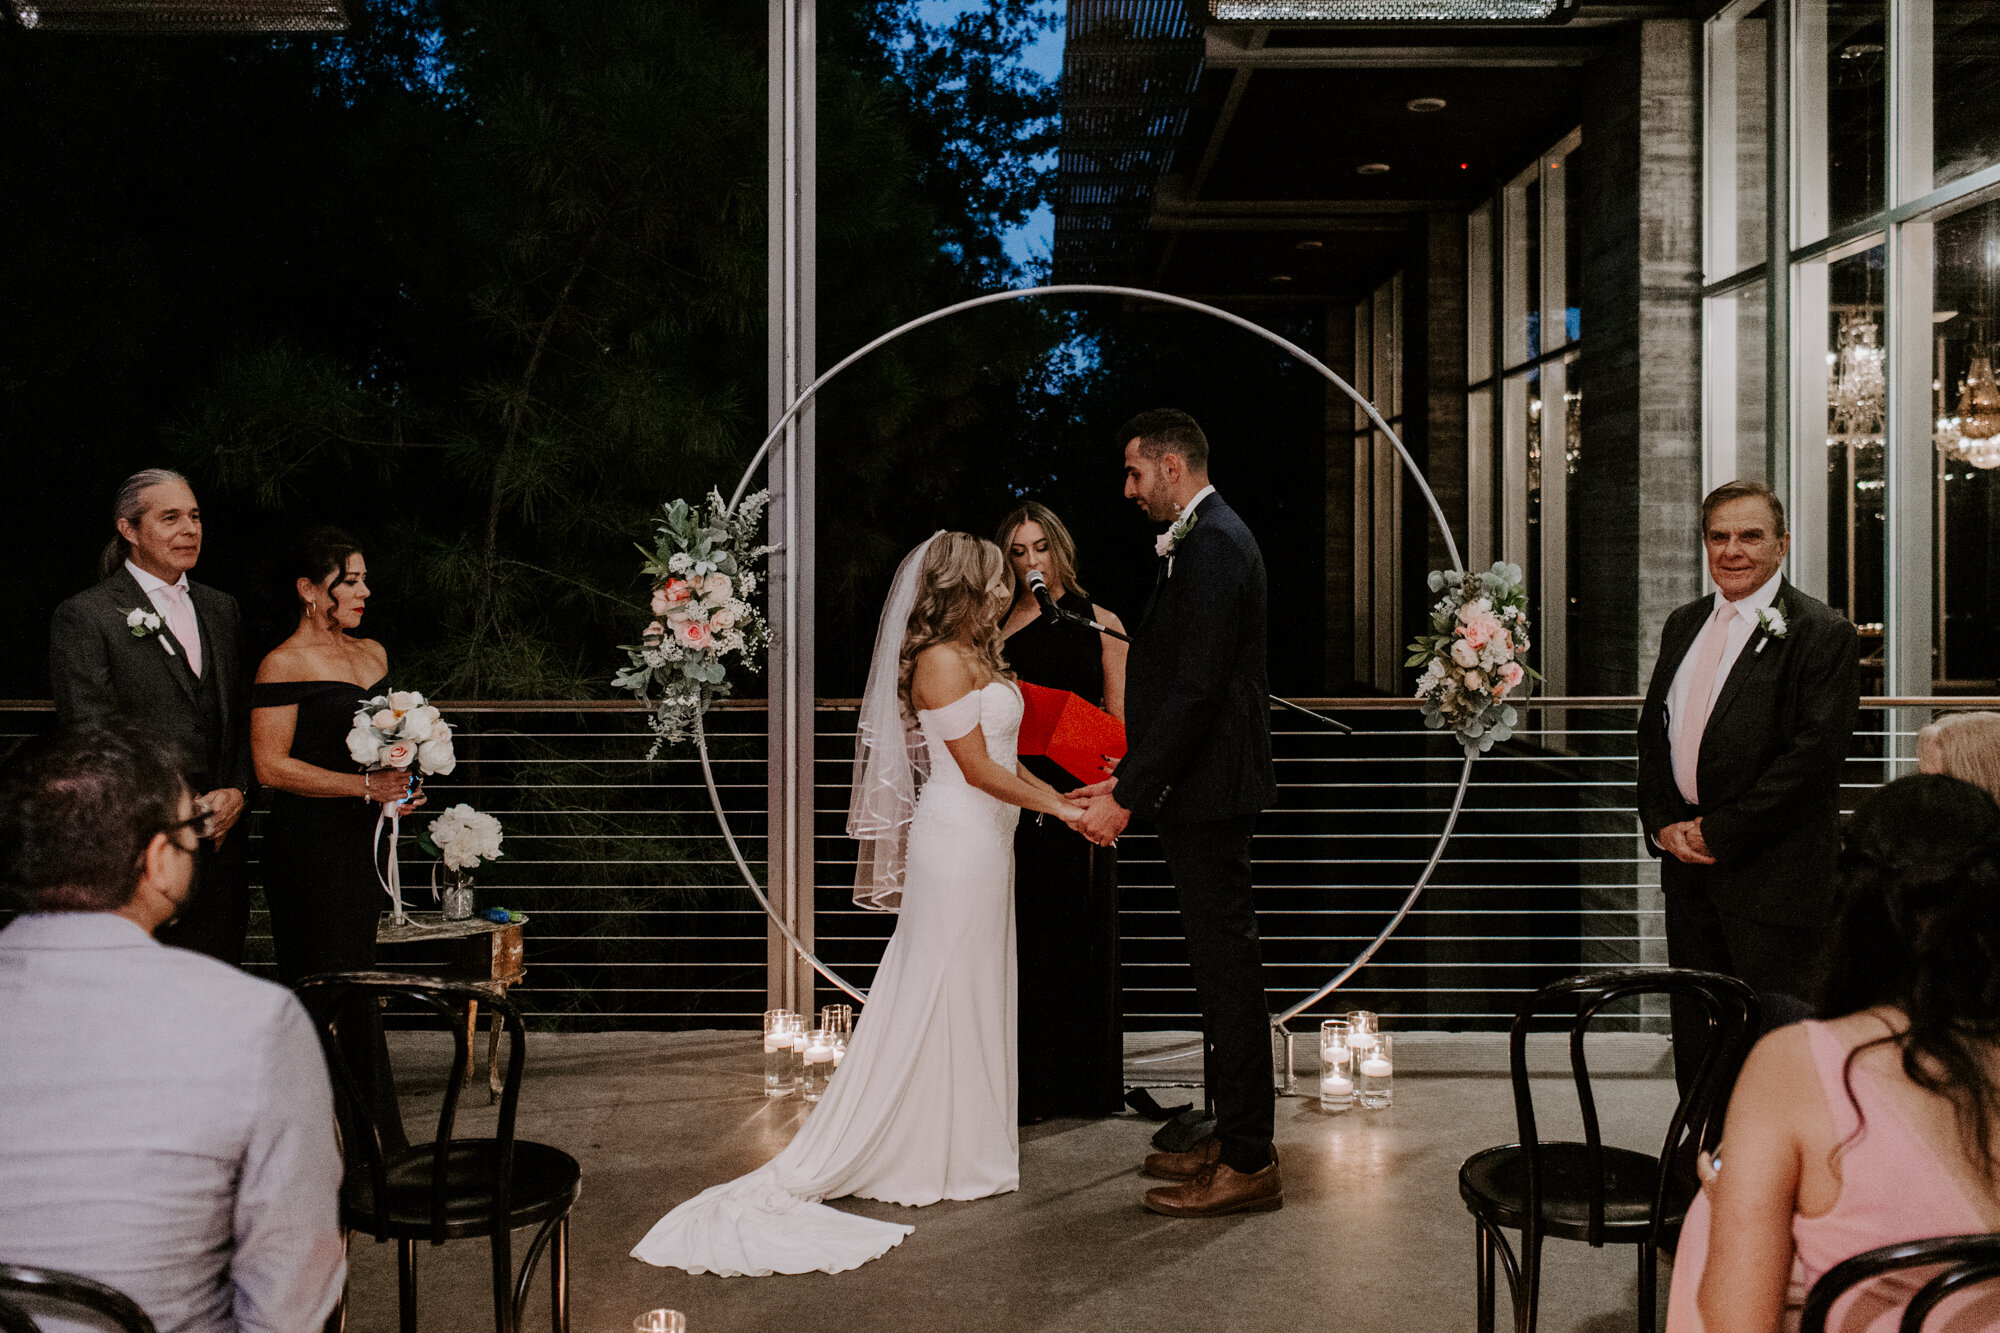 Beautiful night time ceremony. Glamorous Wedding at The Dunlavy and the Lost Lake Buffalo Bayou Park